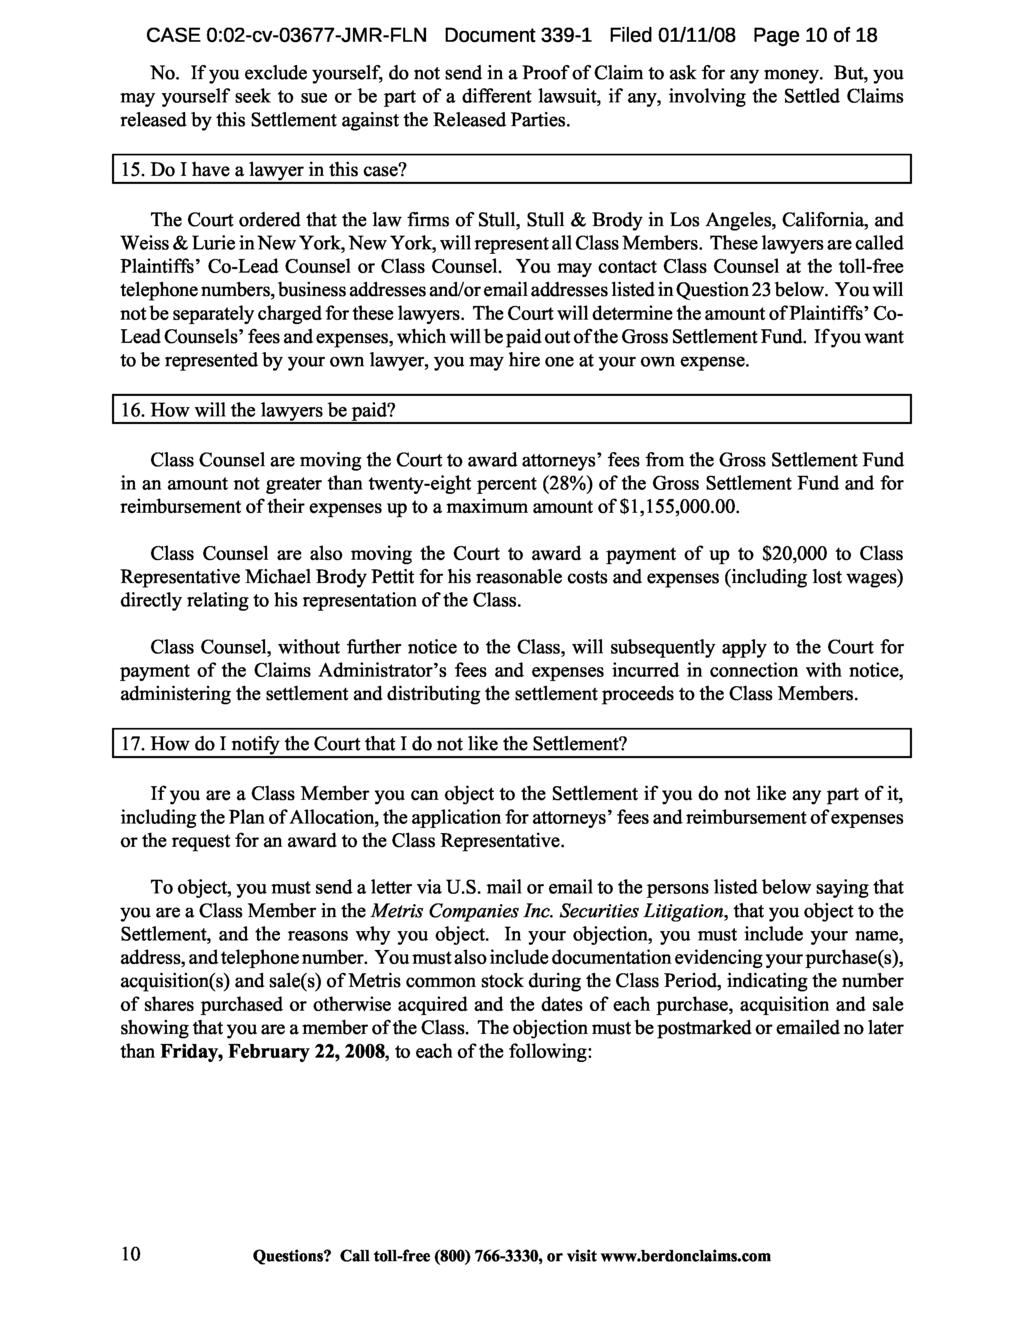 CASE 0:02-cv-03677-JMR-FLN Document 339-1 Filed 01/11/08 Page 10 of 18 No. If you exclude yourself, do not send in a Proof of Claim to ask for any money.